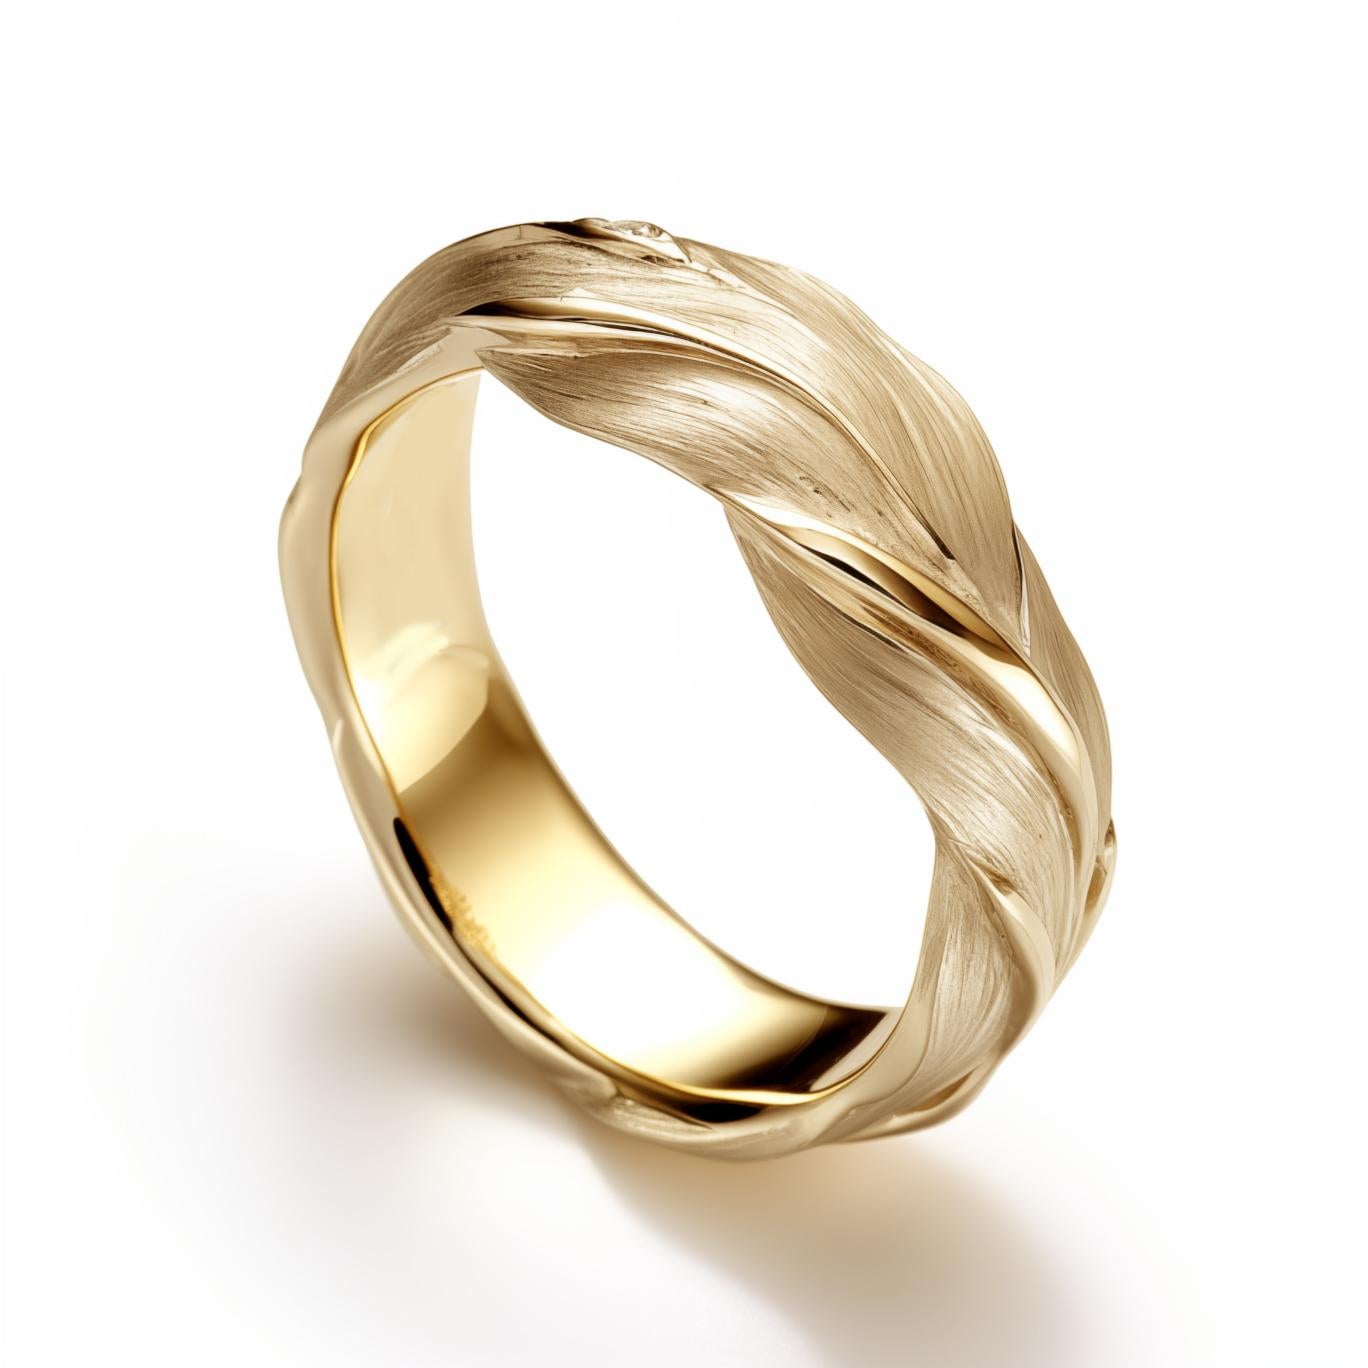 This contemporary Swan wedding ring is made of 18 karat yellow gold and 5 diamonds. It has a sculptural shape. We use the best natural diamonds VS, F-G, we work with German gemstone companies that have been in business since the 19th century. Width: